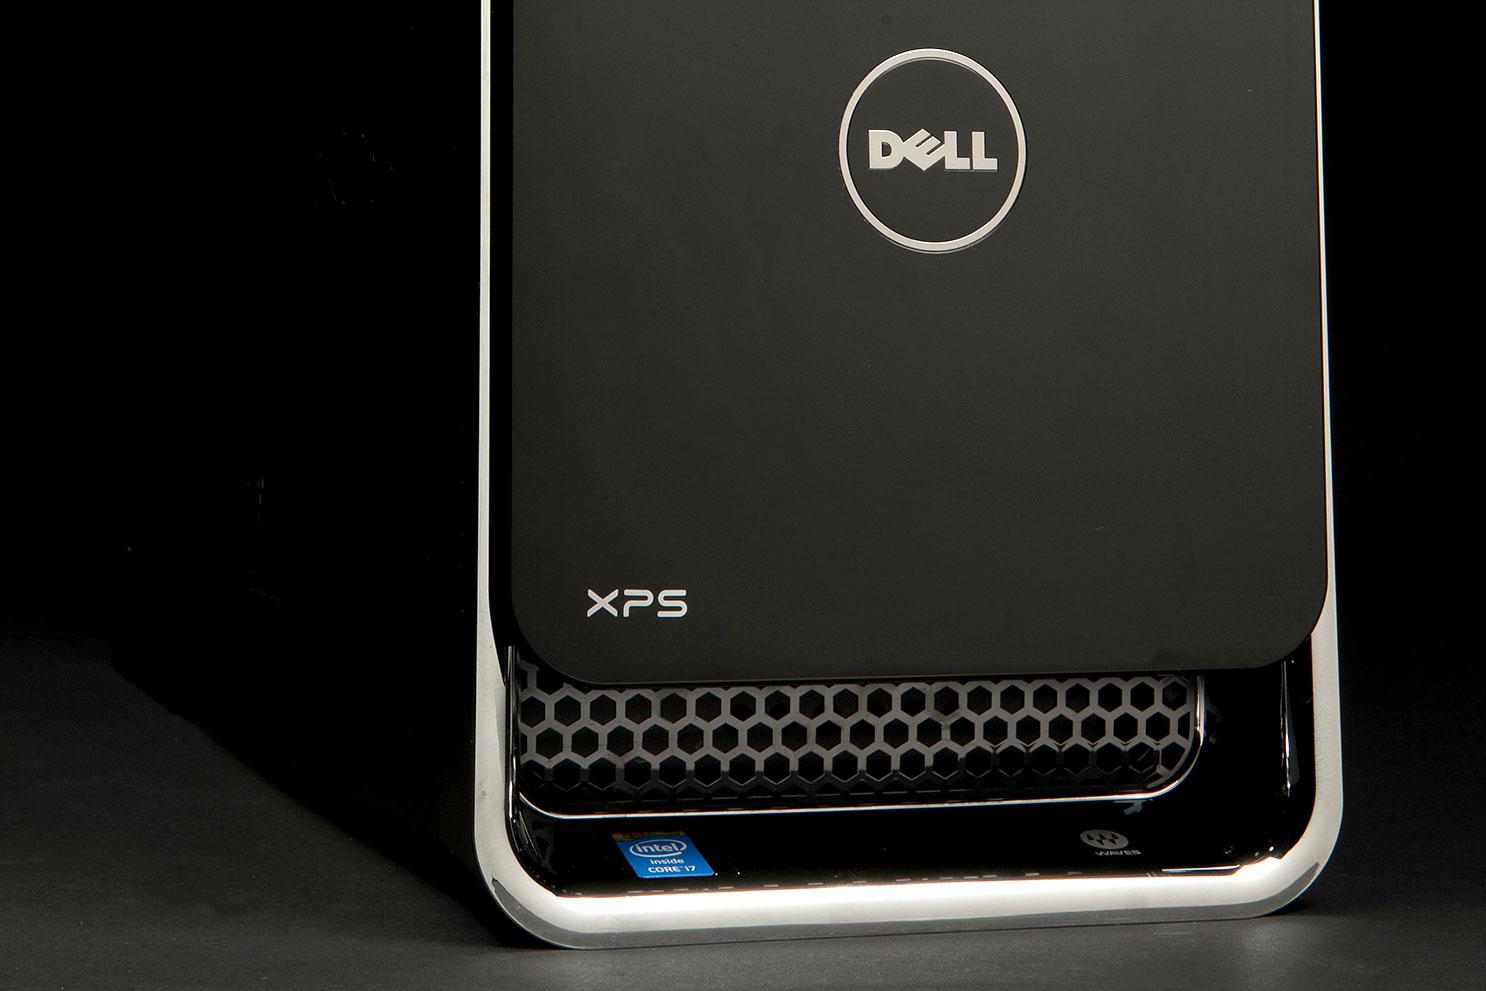 Dell XPS 8700 Special Edition review | Digital Trends